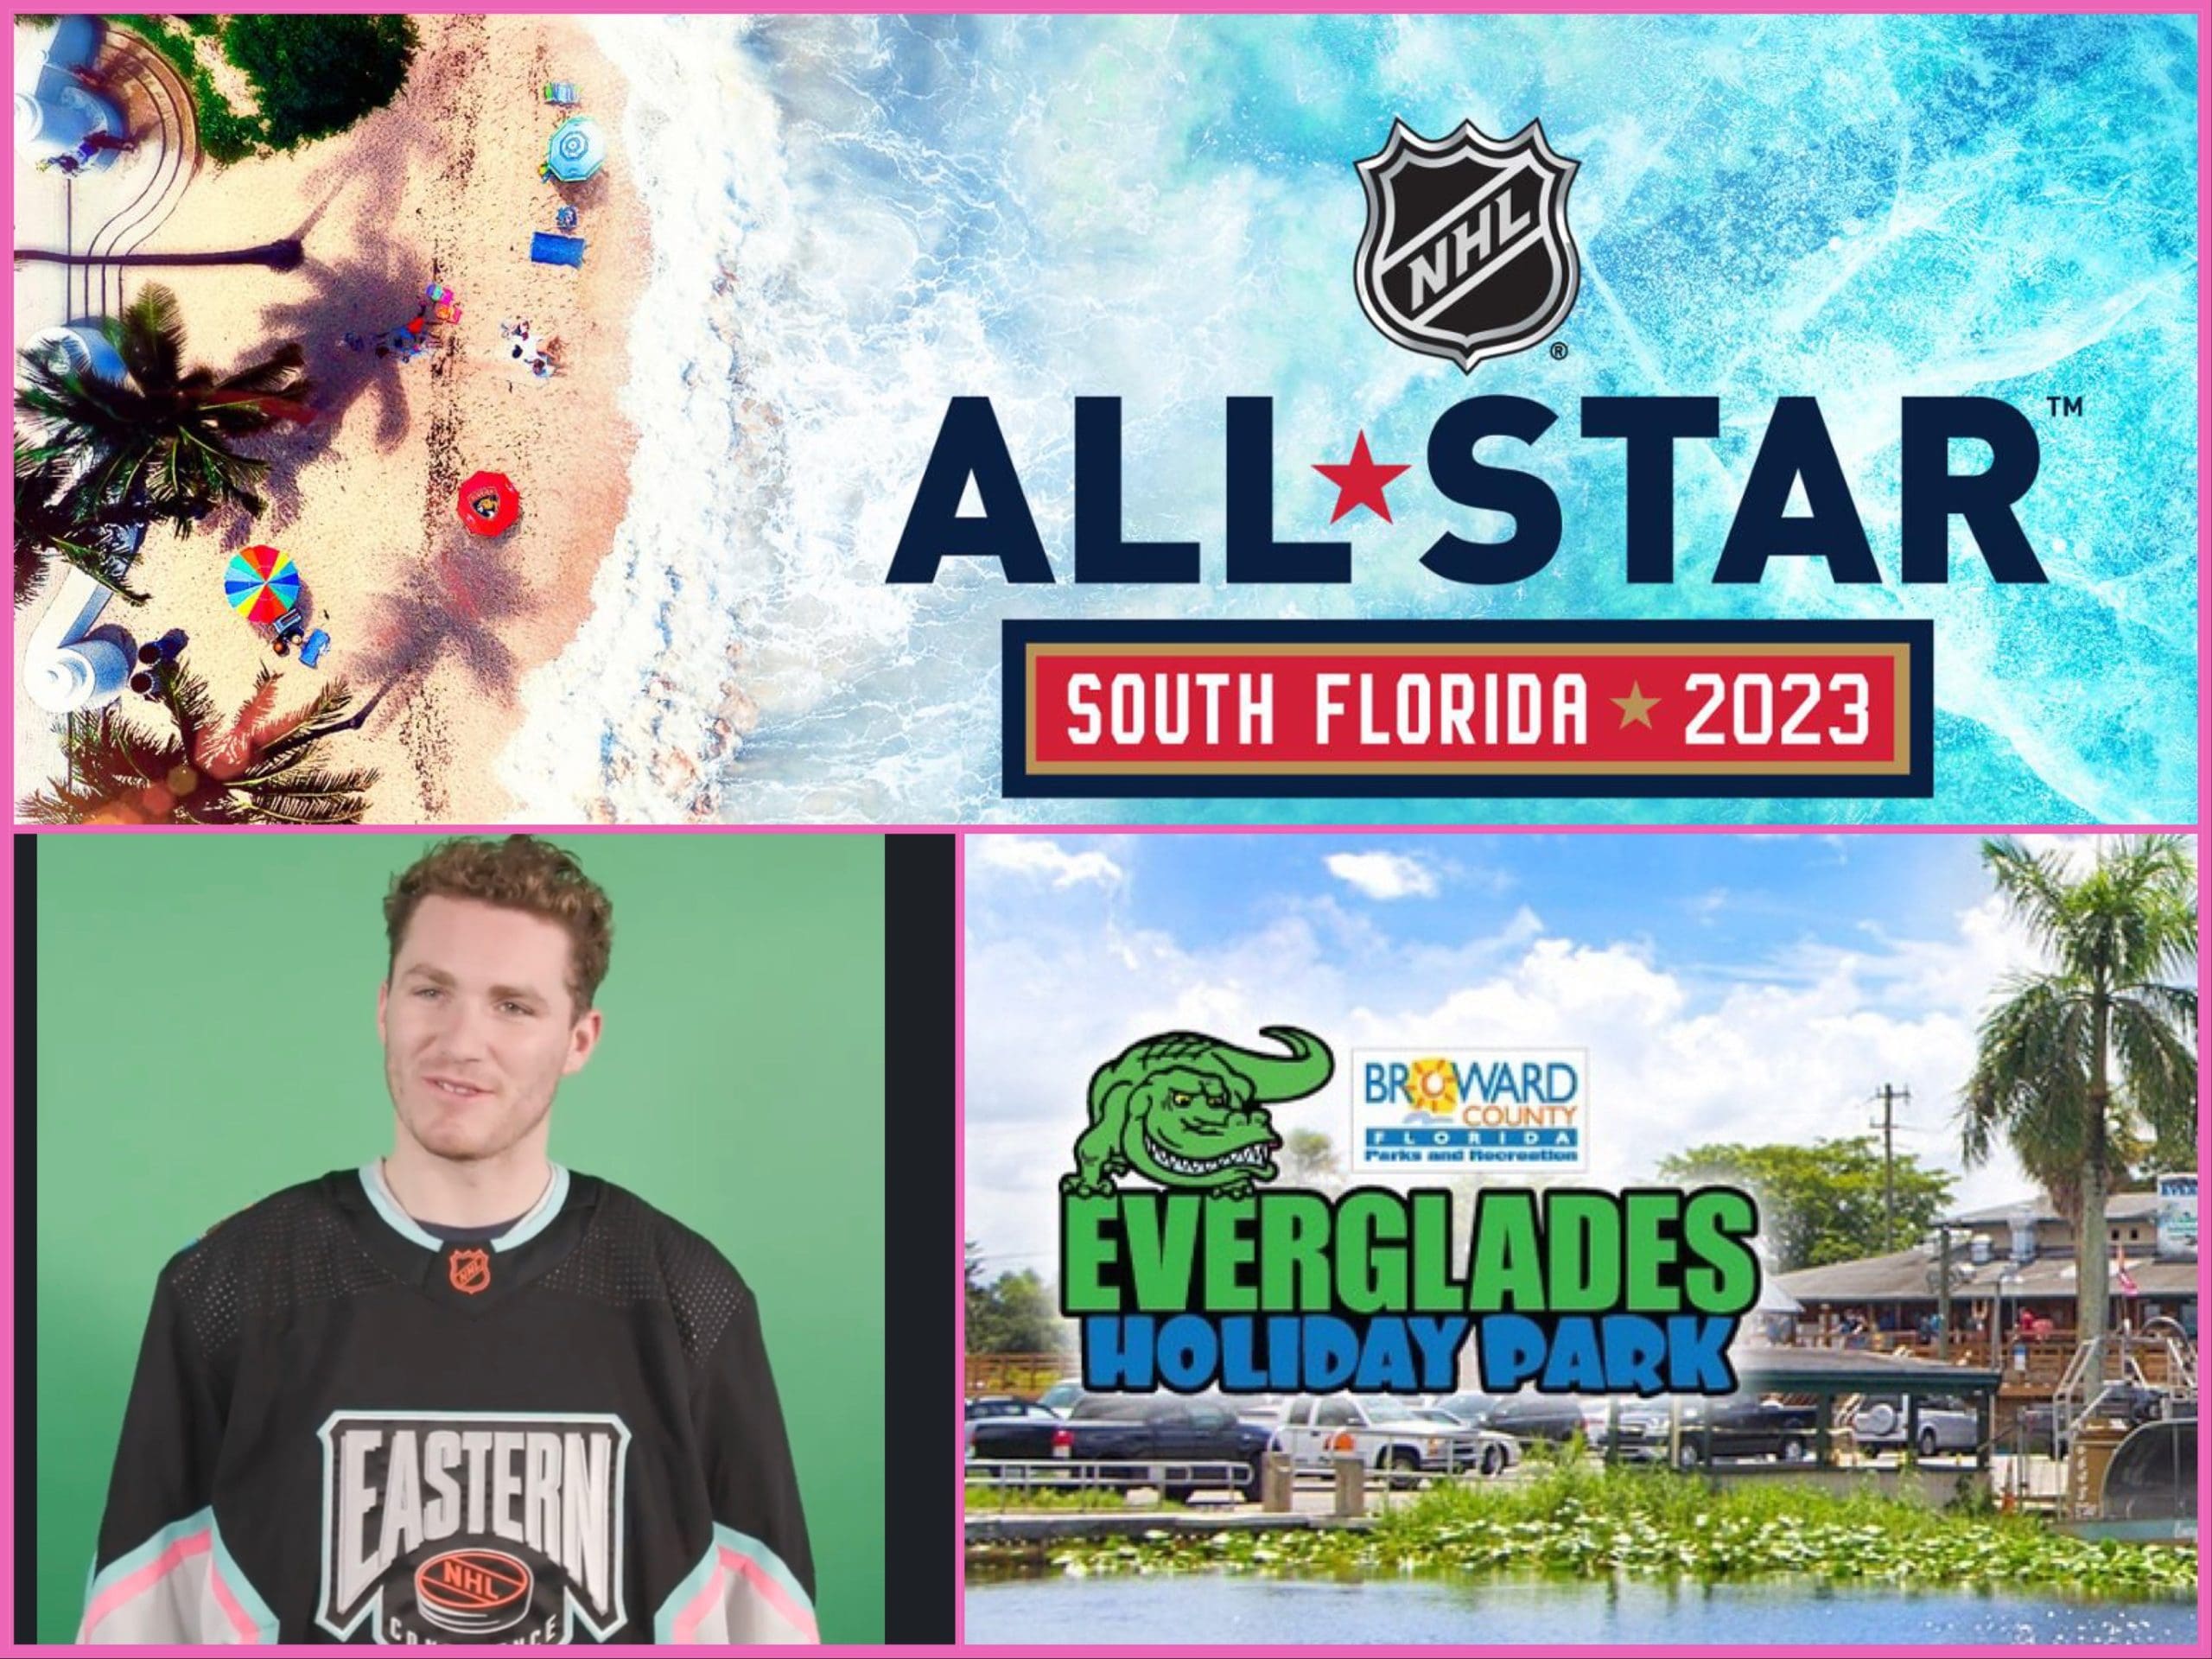 NHL All-Star Weekend: 'Vice' Jerseys, Local Events and Alligators?